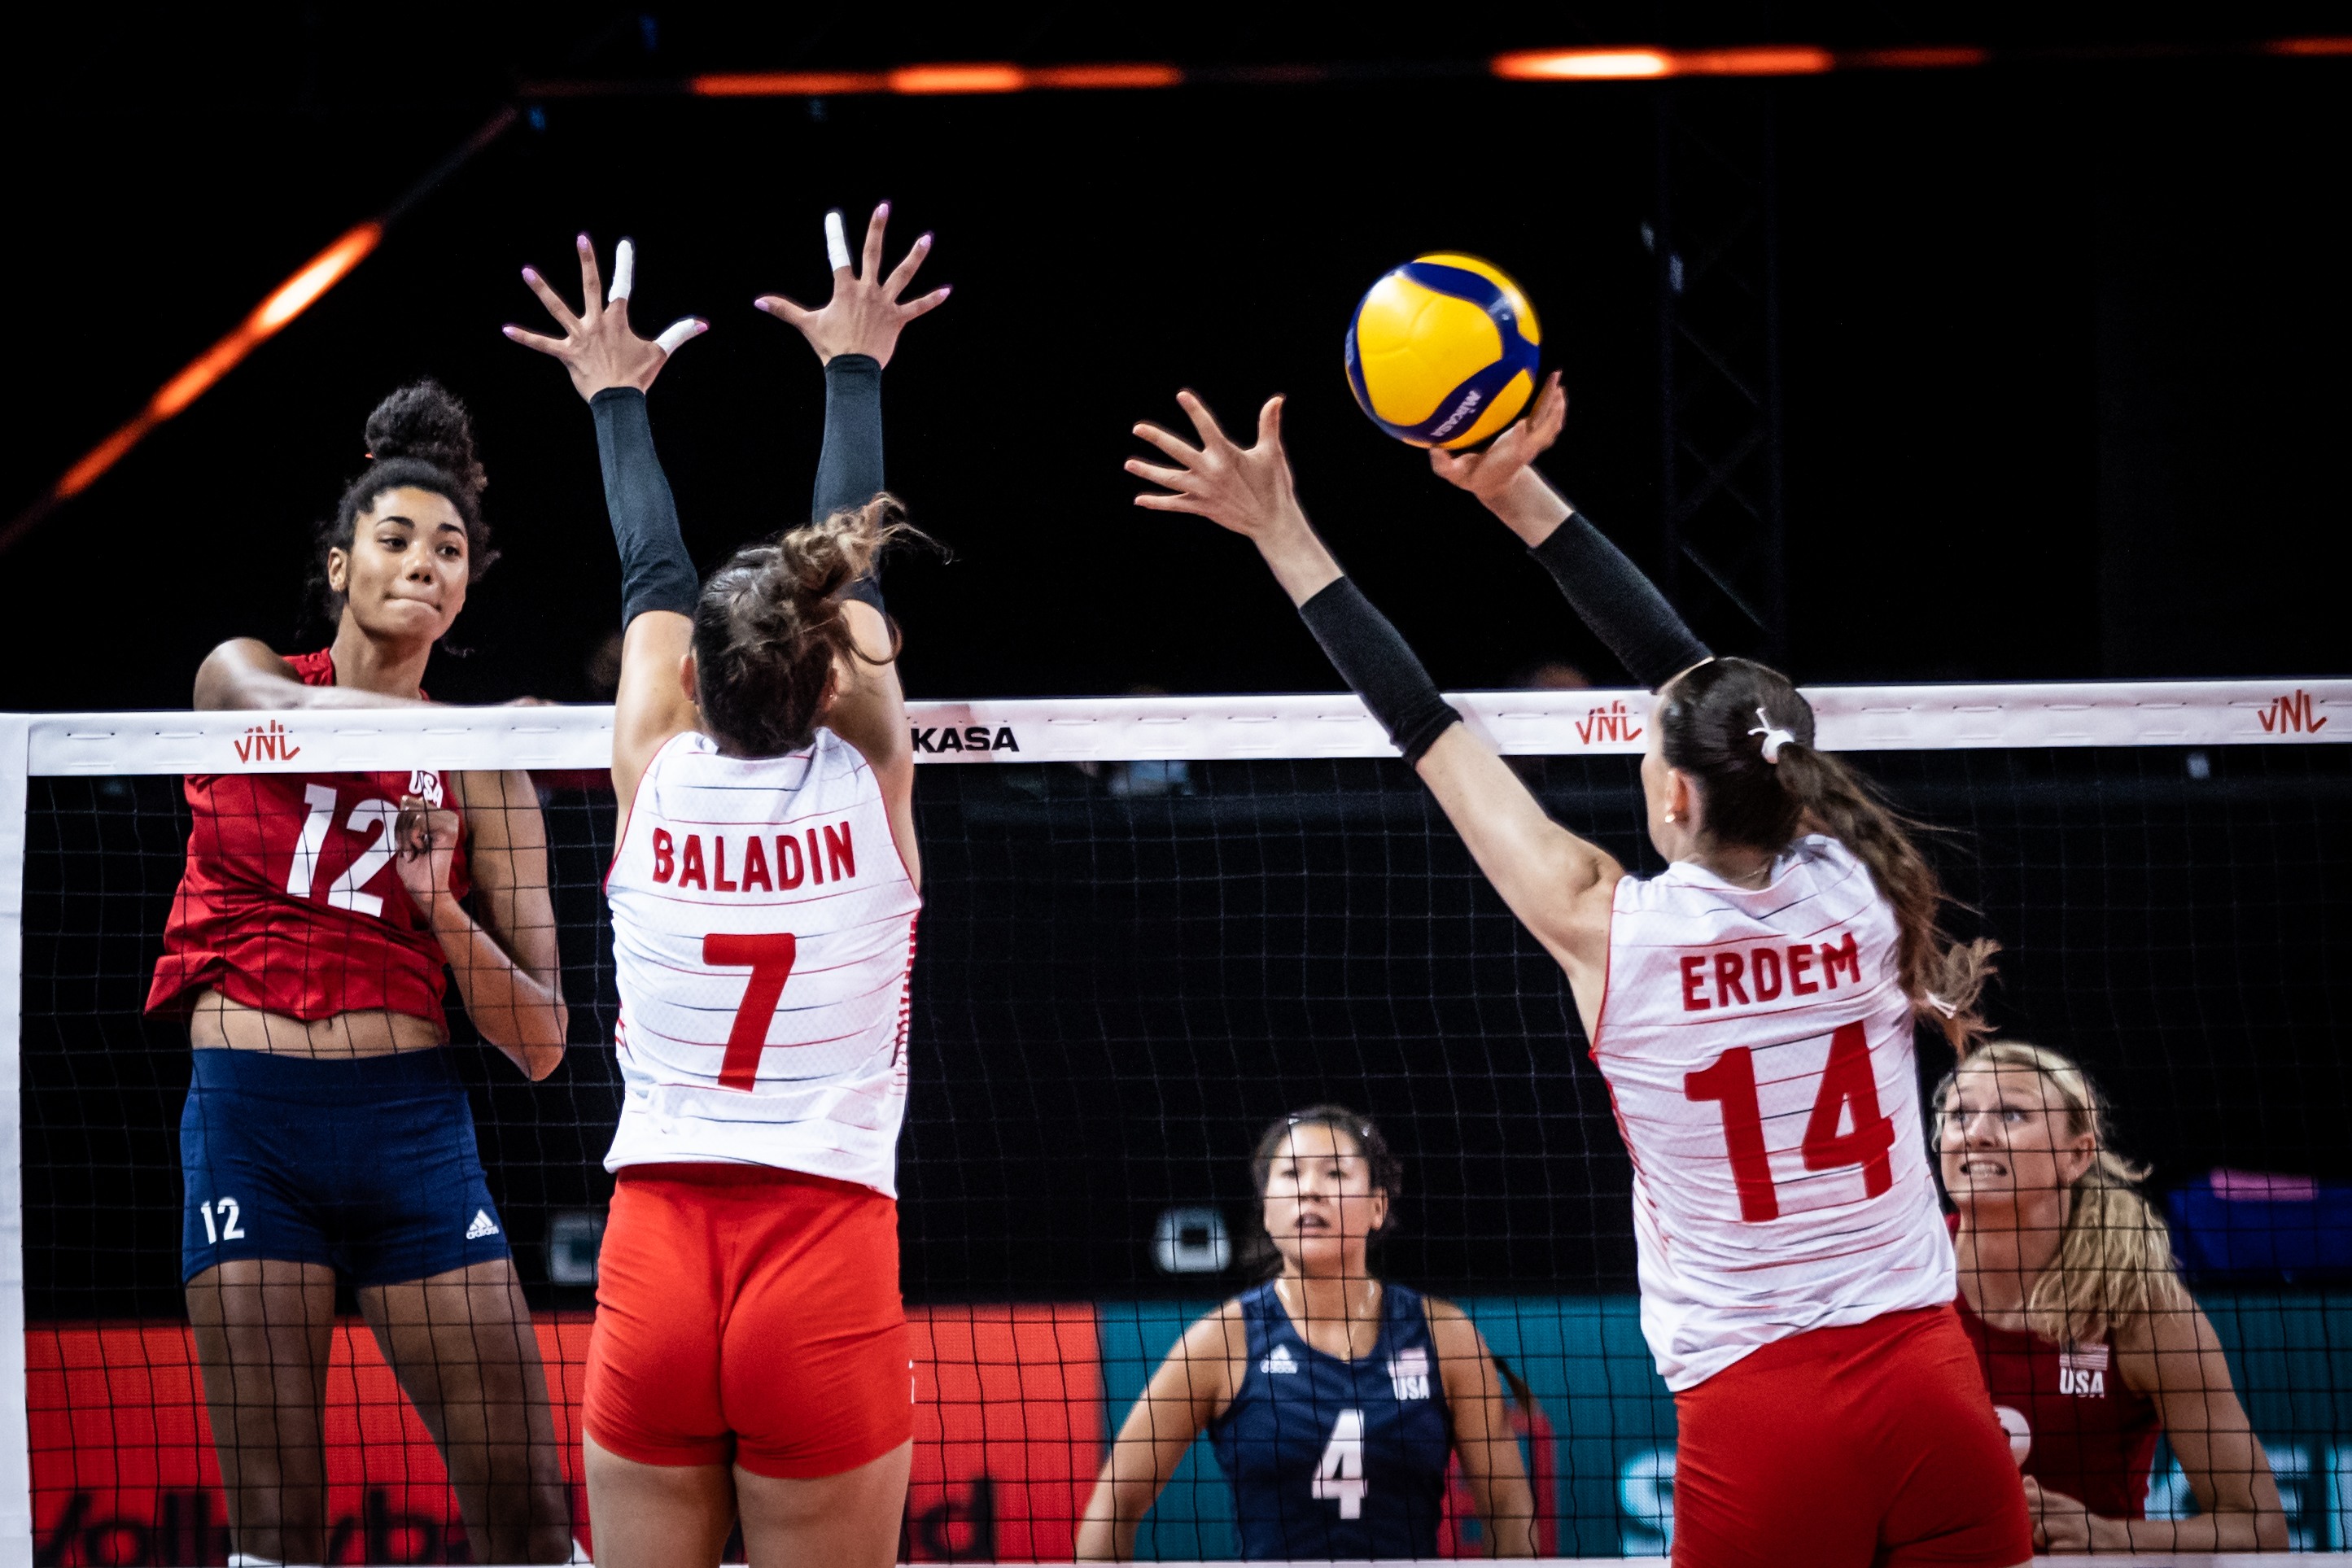 Türkiye to wrap up first stage campaign with big game against USA volleyballworld